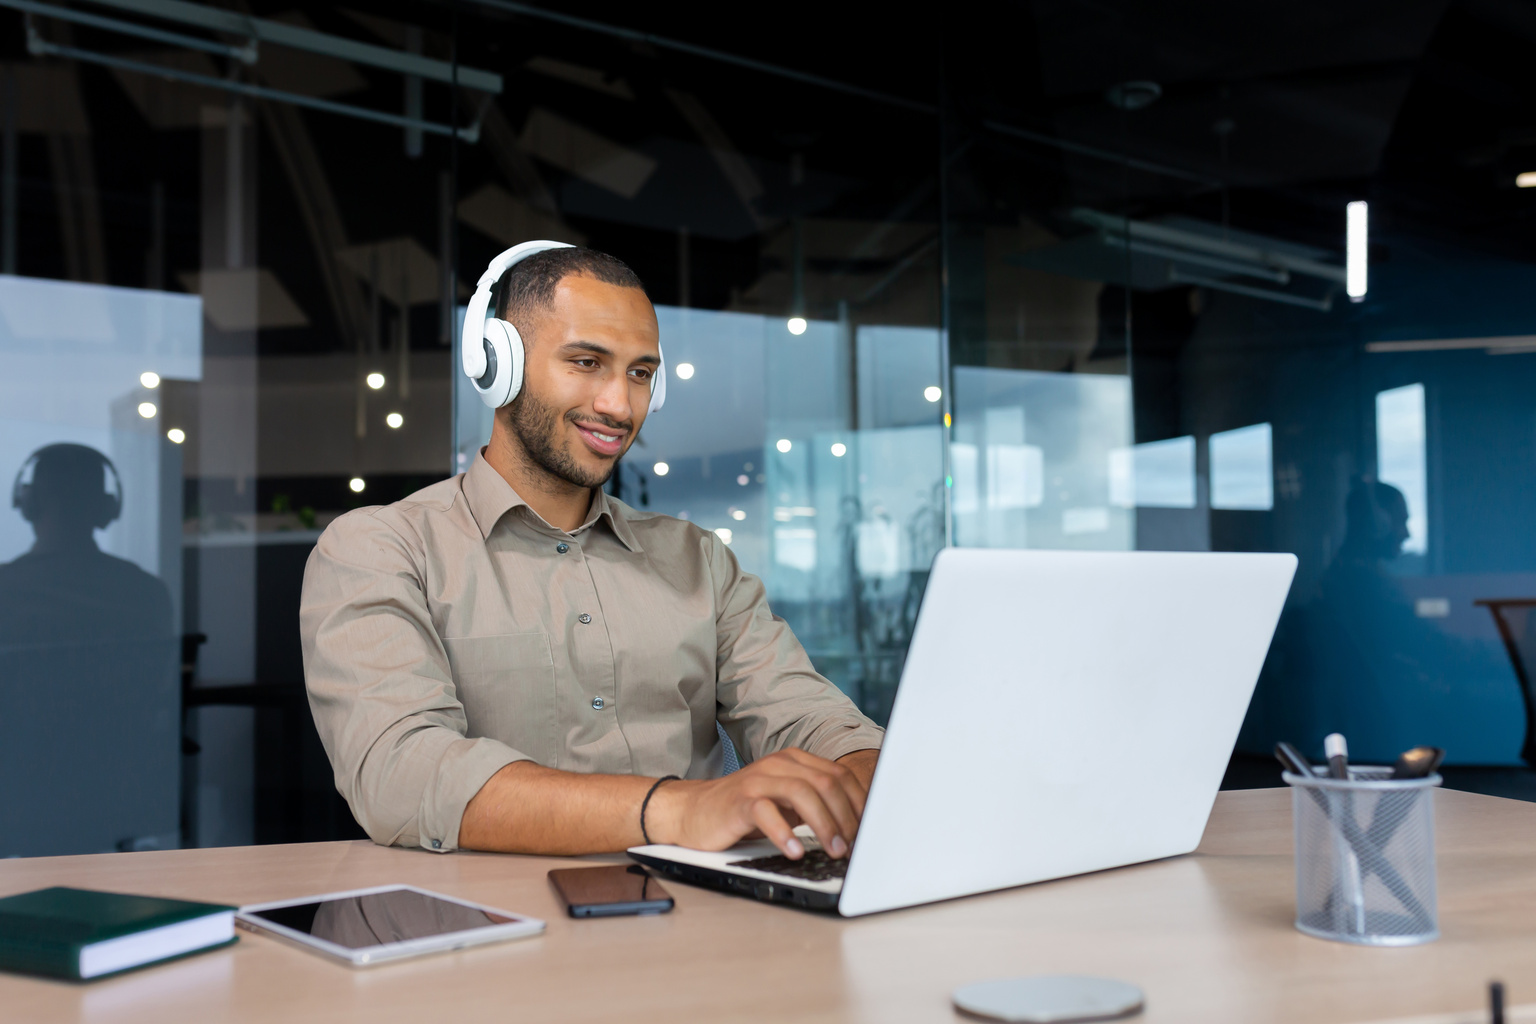 Man with headphones listening to audio podcasts at work